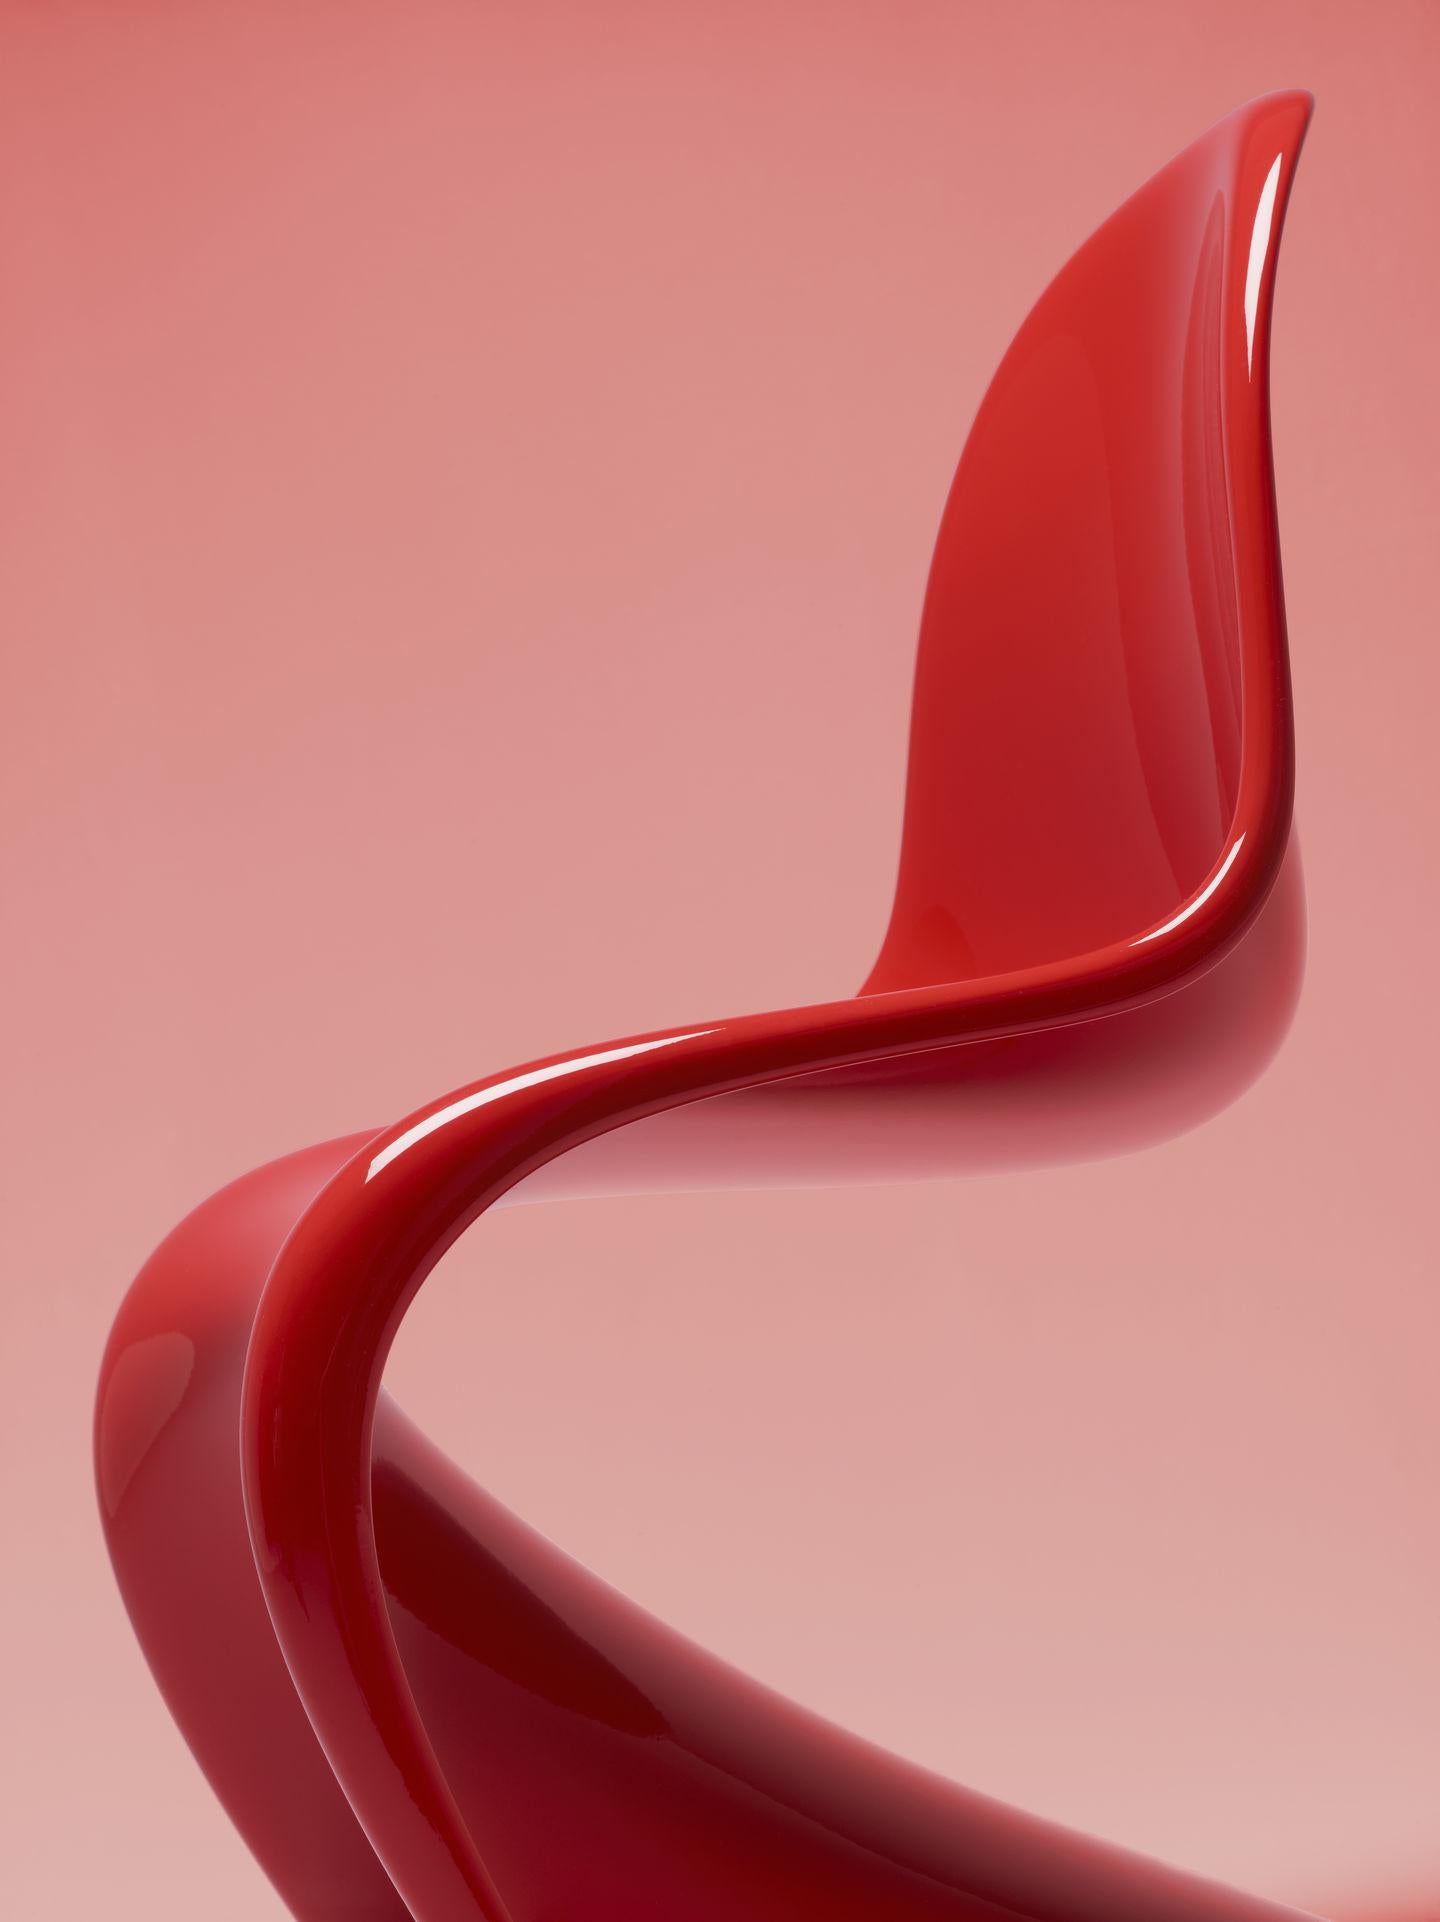 Plastic Panton Chair Classic Designed by Verner Panton and Manufactured by Vitra